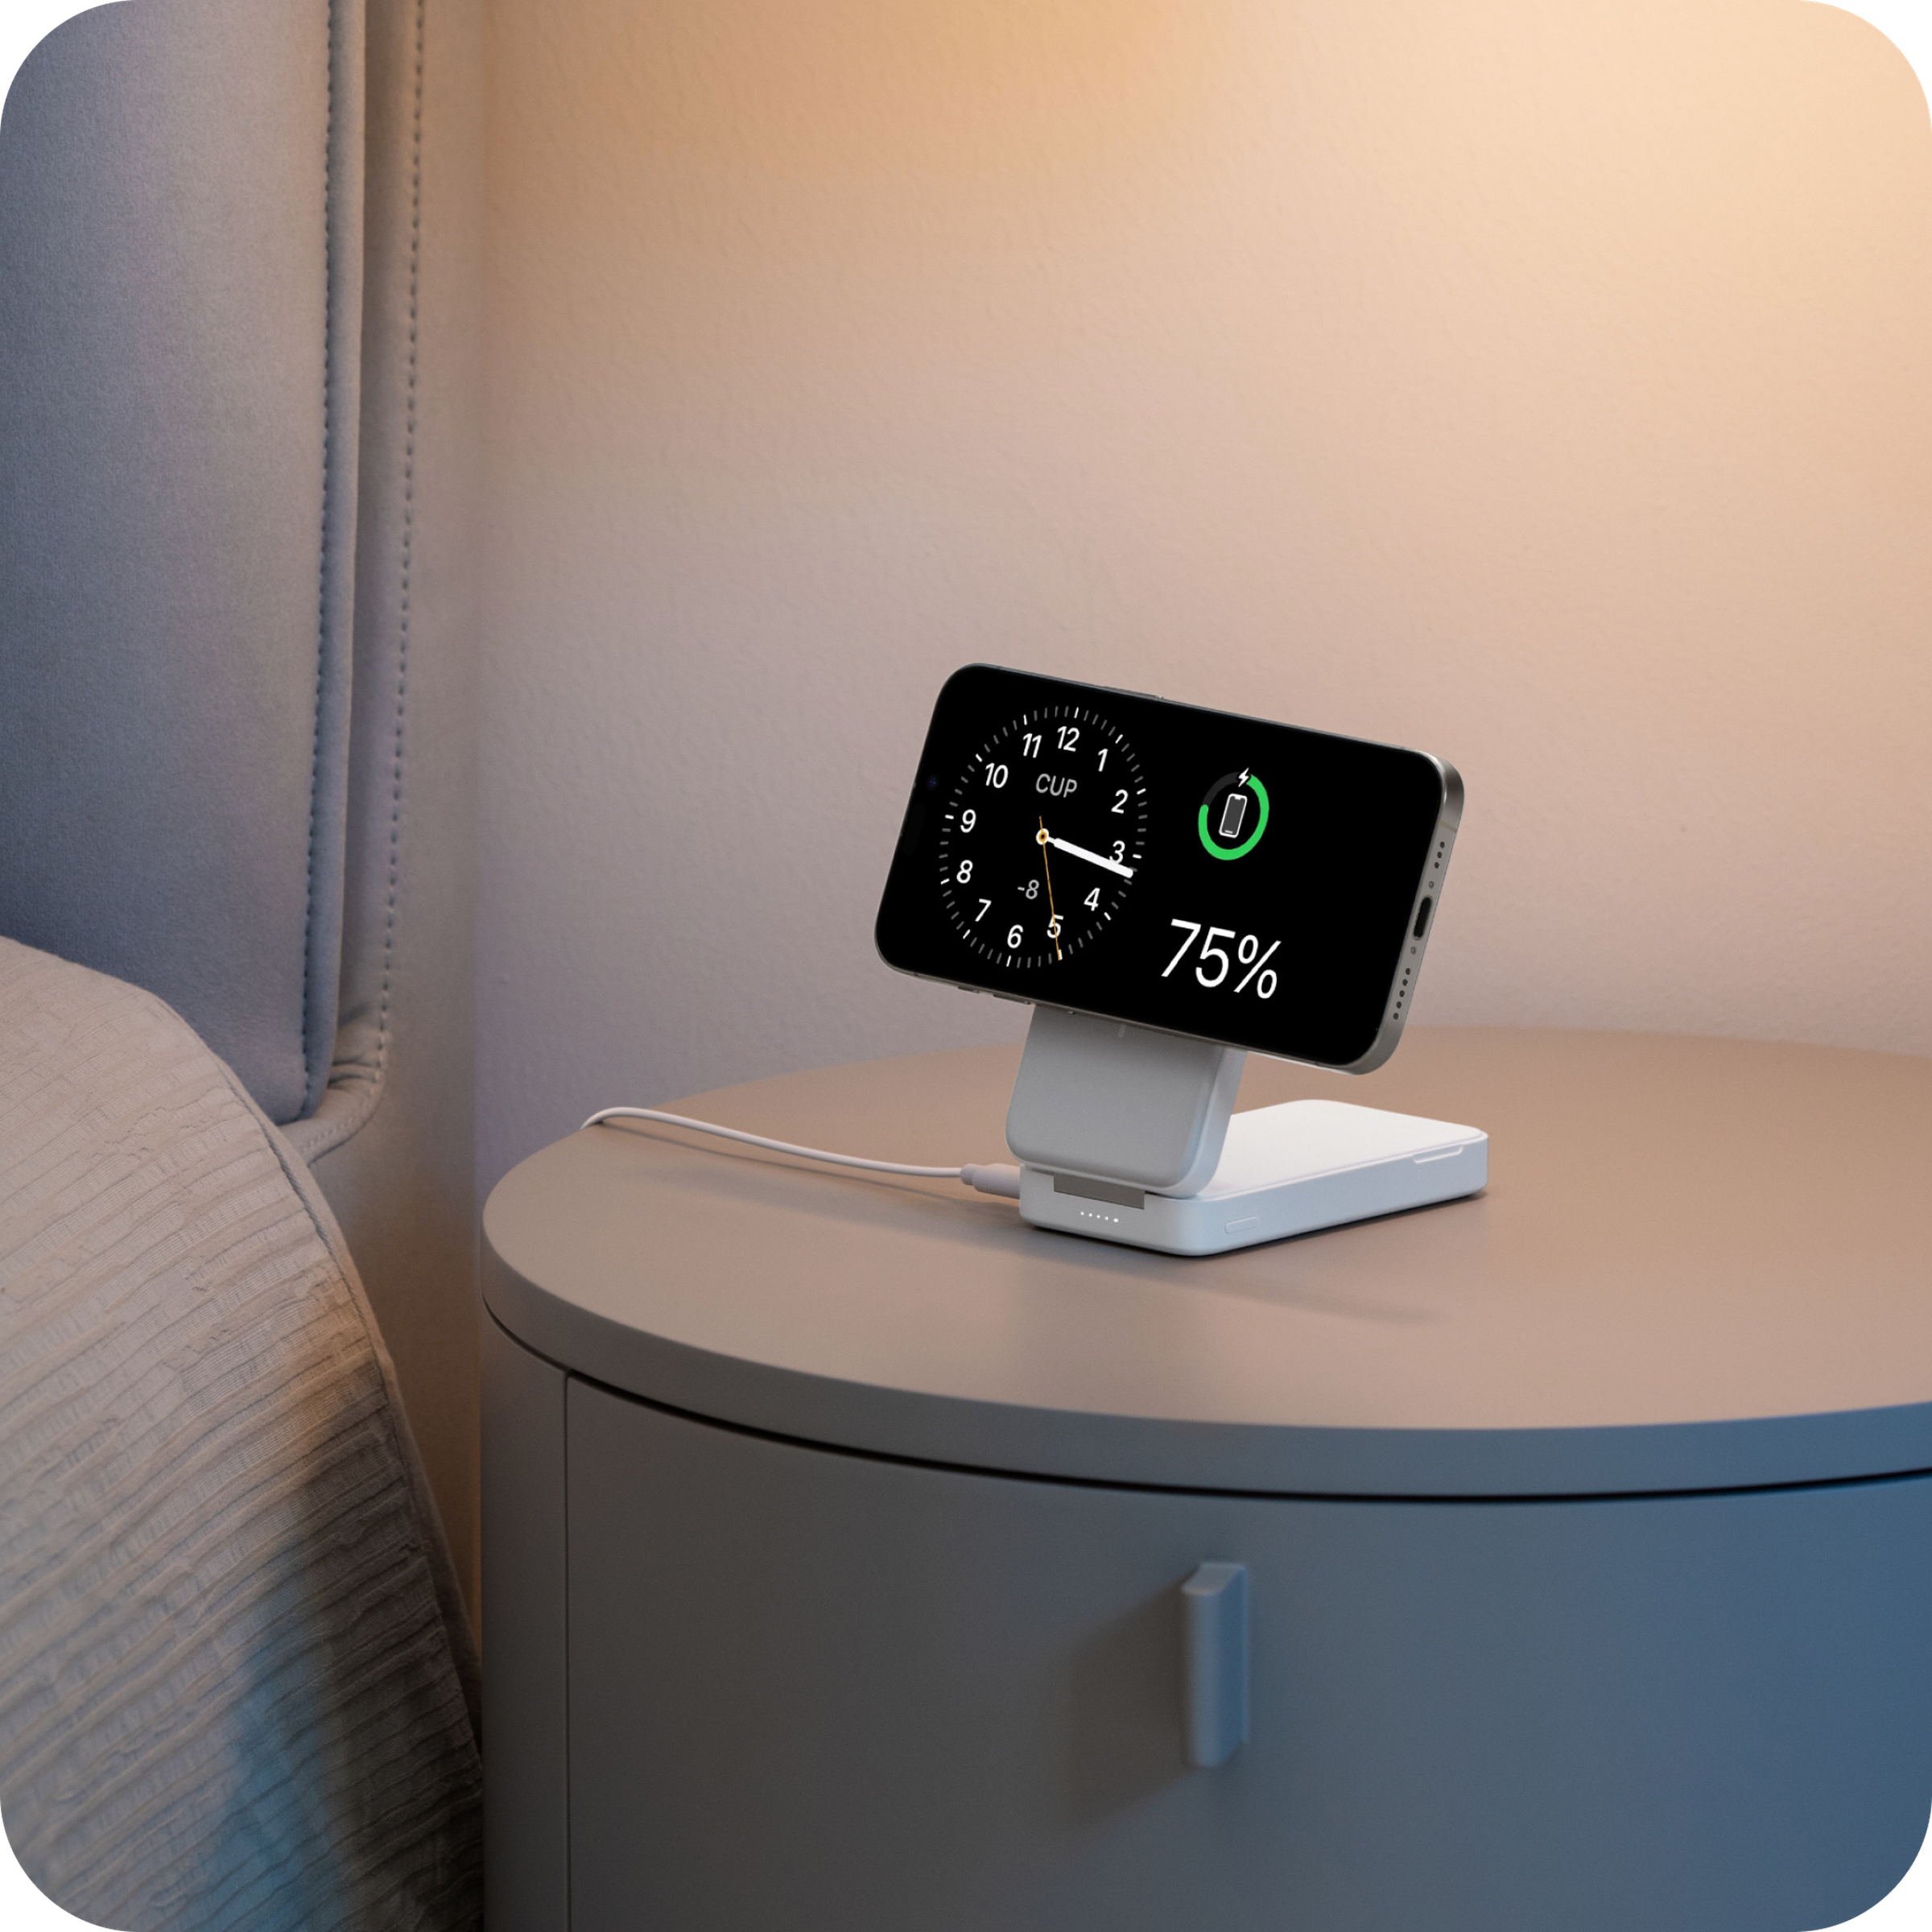 Anker MagGo charger sitting on nightstand